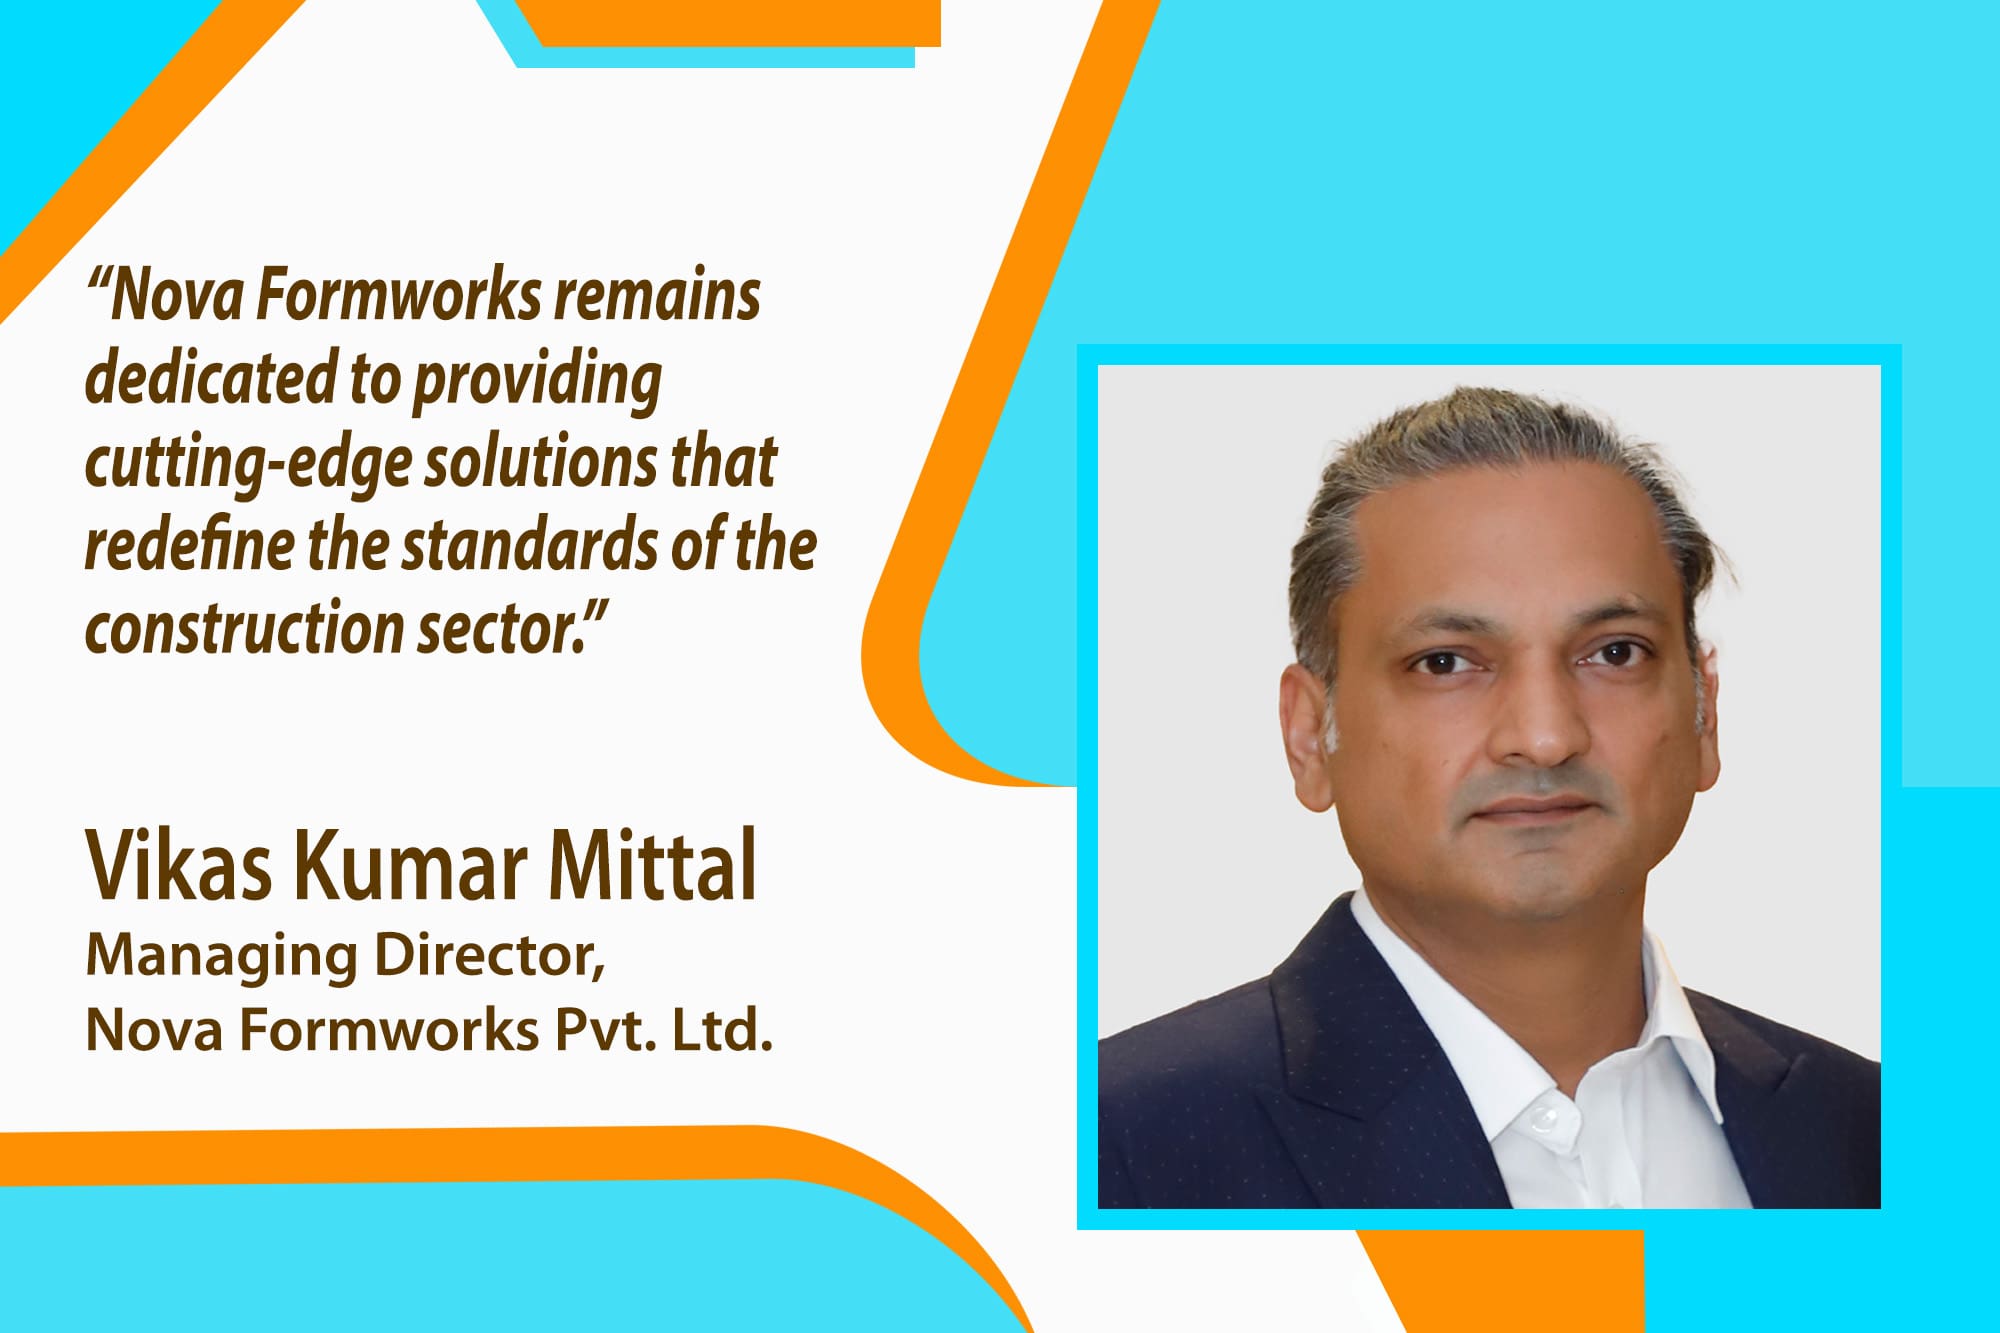 As the construction industry undergoes rapid transformations, Nova Formworks Pvt Ltd, led by Vikas Kumar Mittal, is setting the stage for a global revolution.